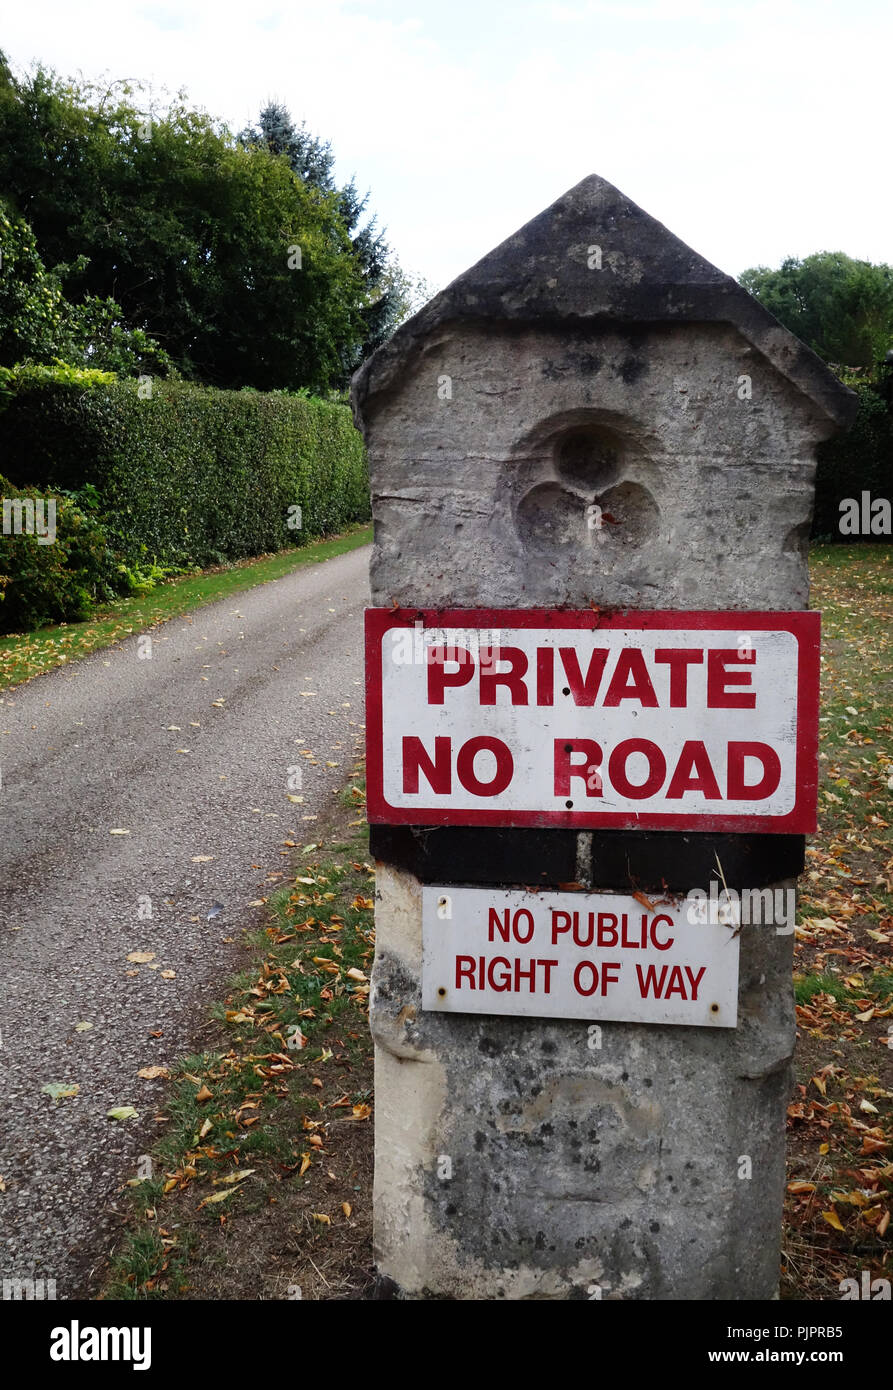 Stone gate pillar with 'Private No Road' sign and 'No Public Right of Way' Stock Photo